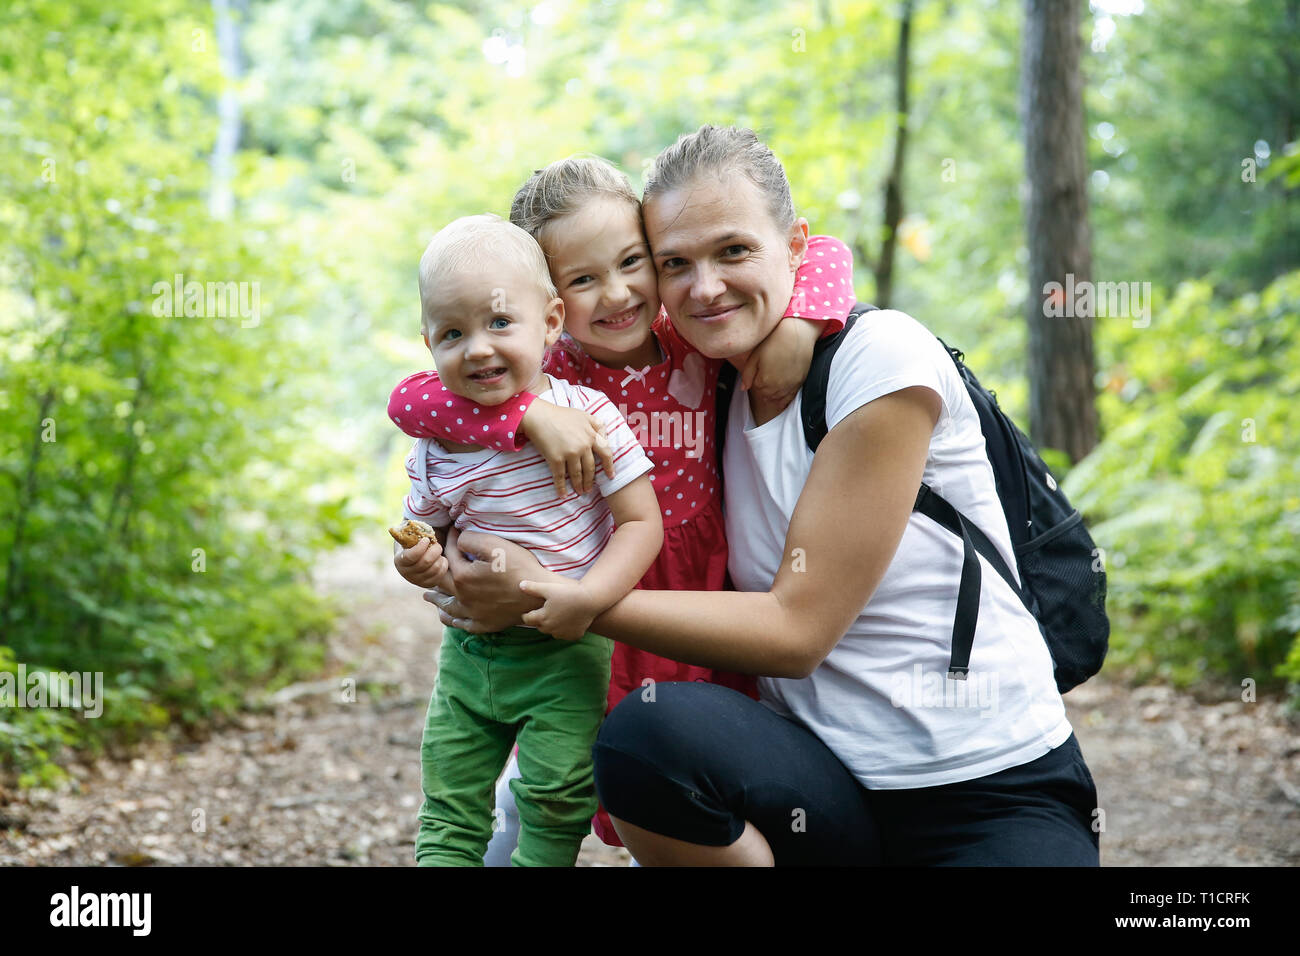 Devoted mother hugging her son and daughter, enjoying the outdoor. Family love and bonding, active lifestyle, mothers day concept. Stock Photo